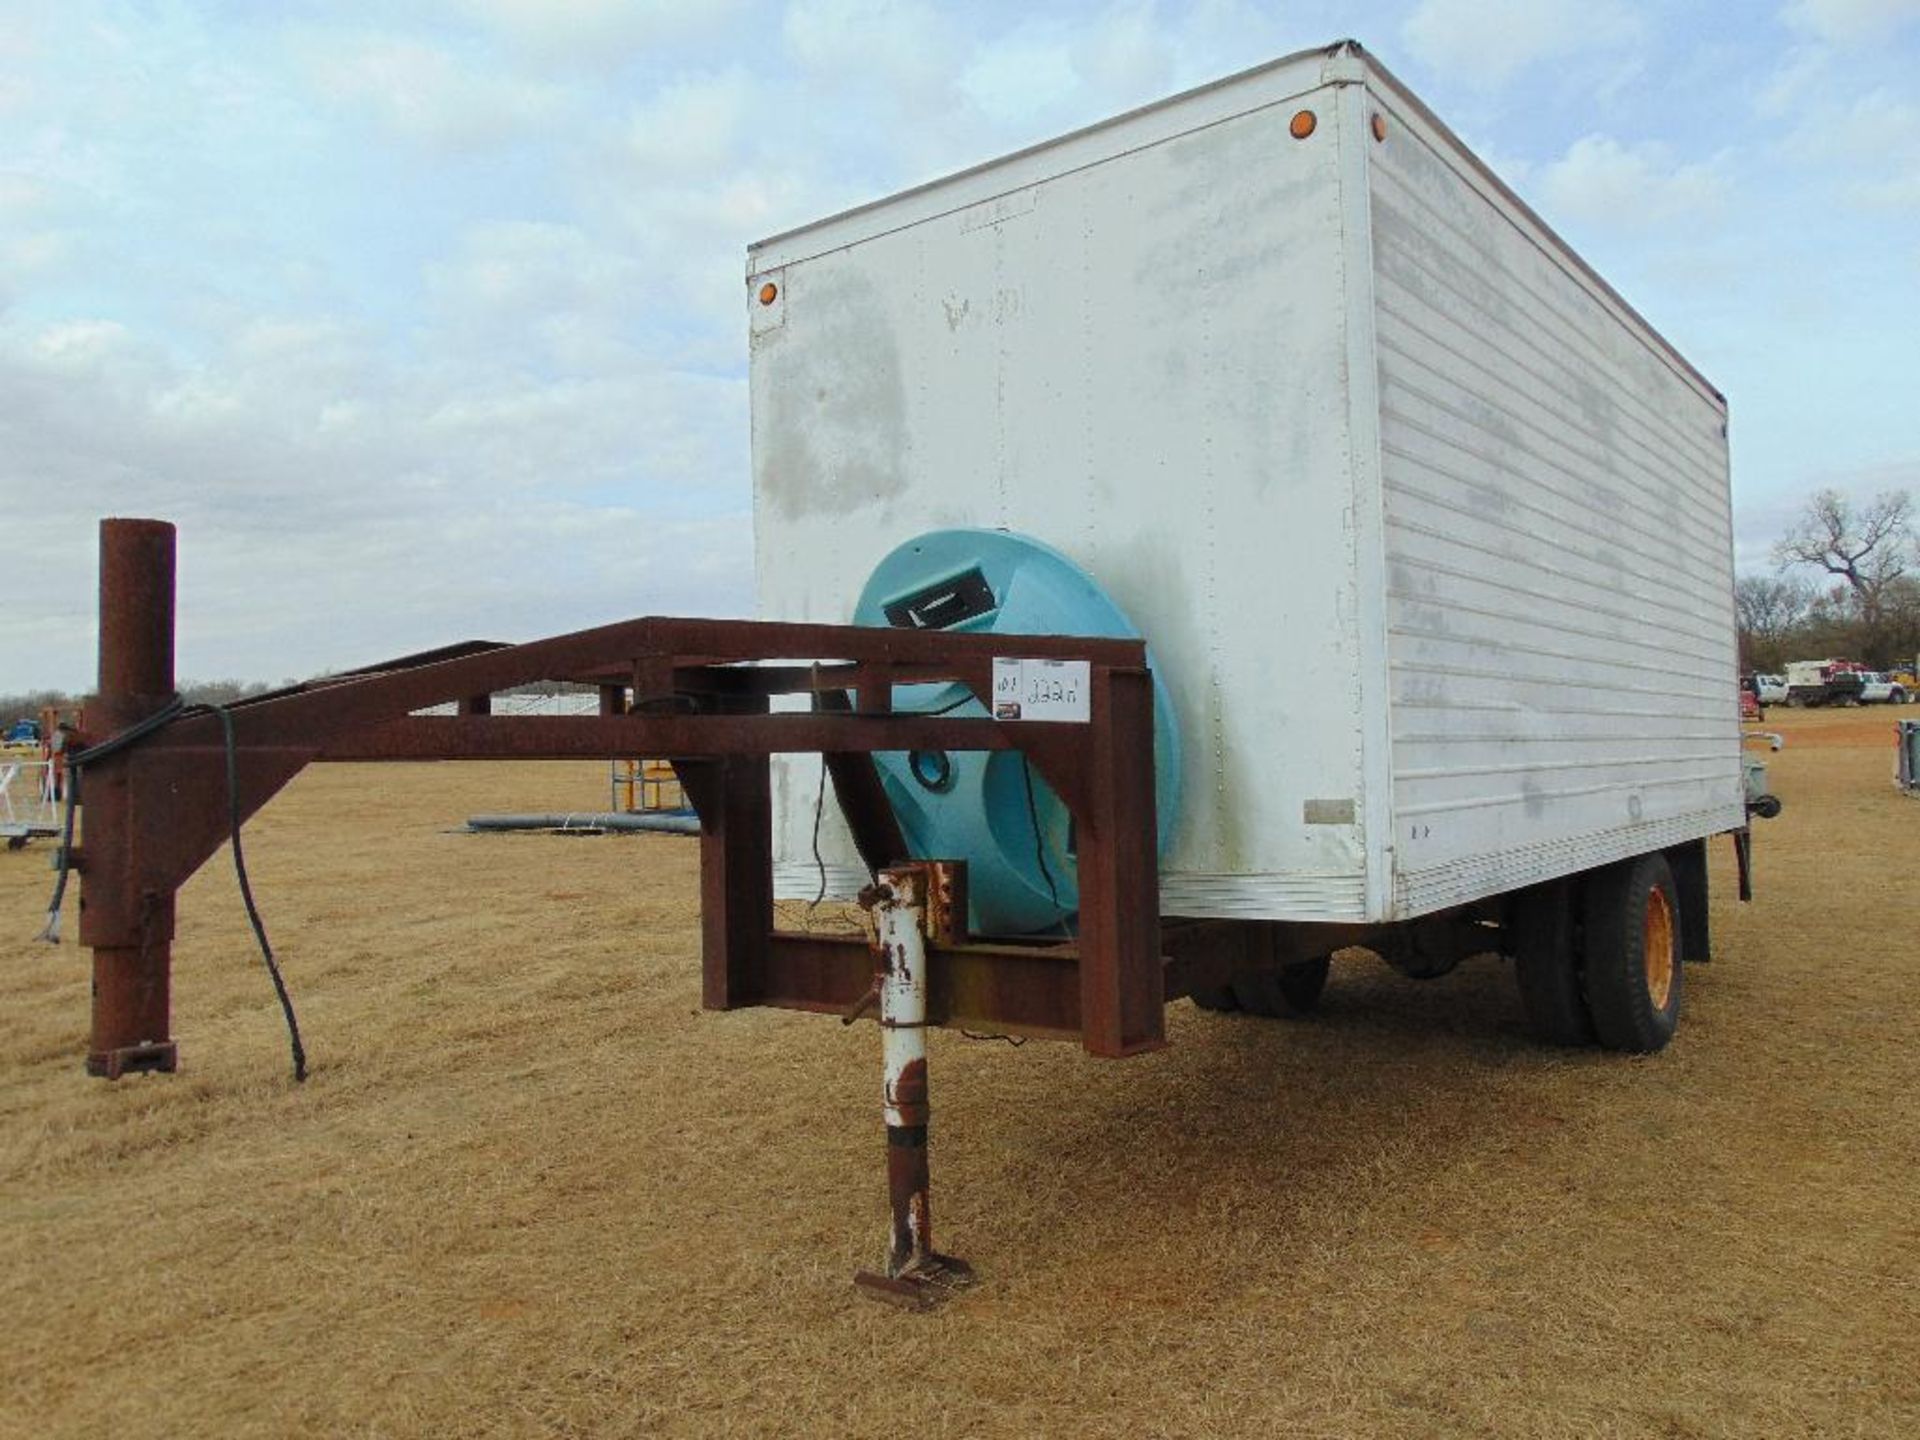 S/A Gooseneck 21' Trailer Frame w/ Pike Enclosed Box, (Bill of Sale)